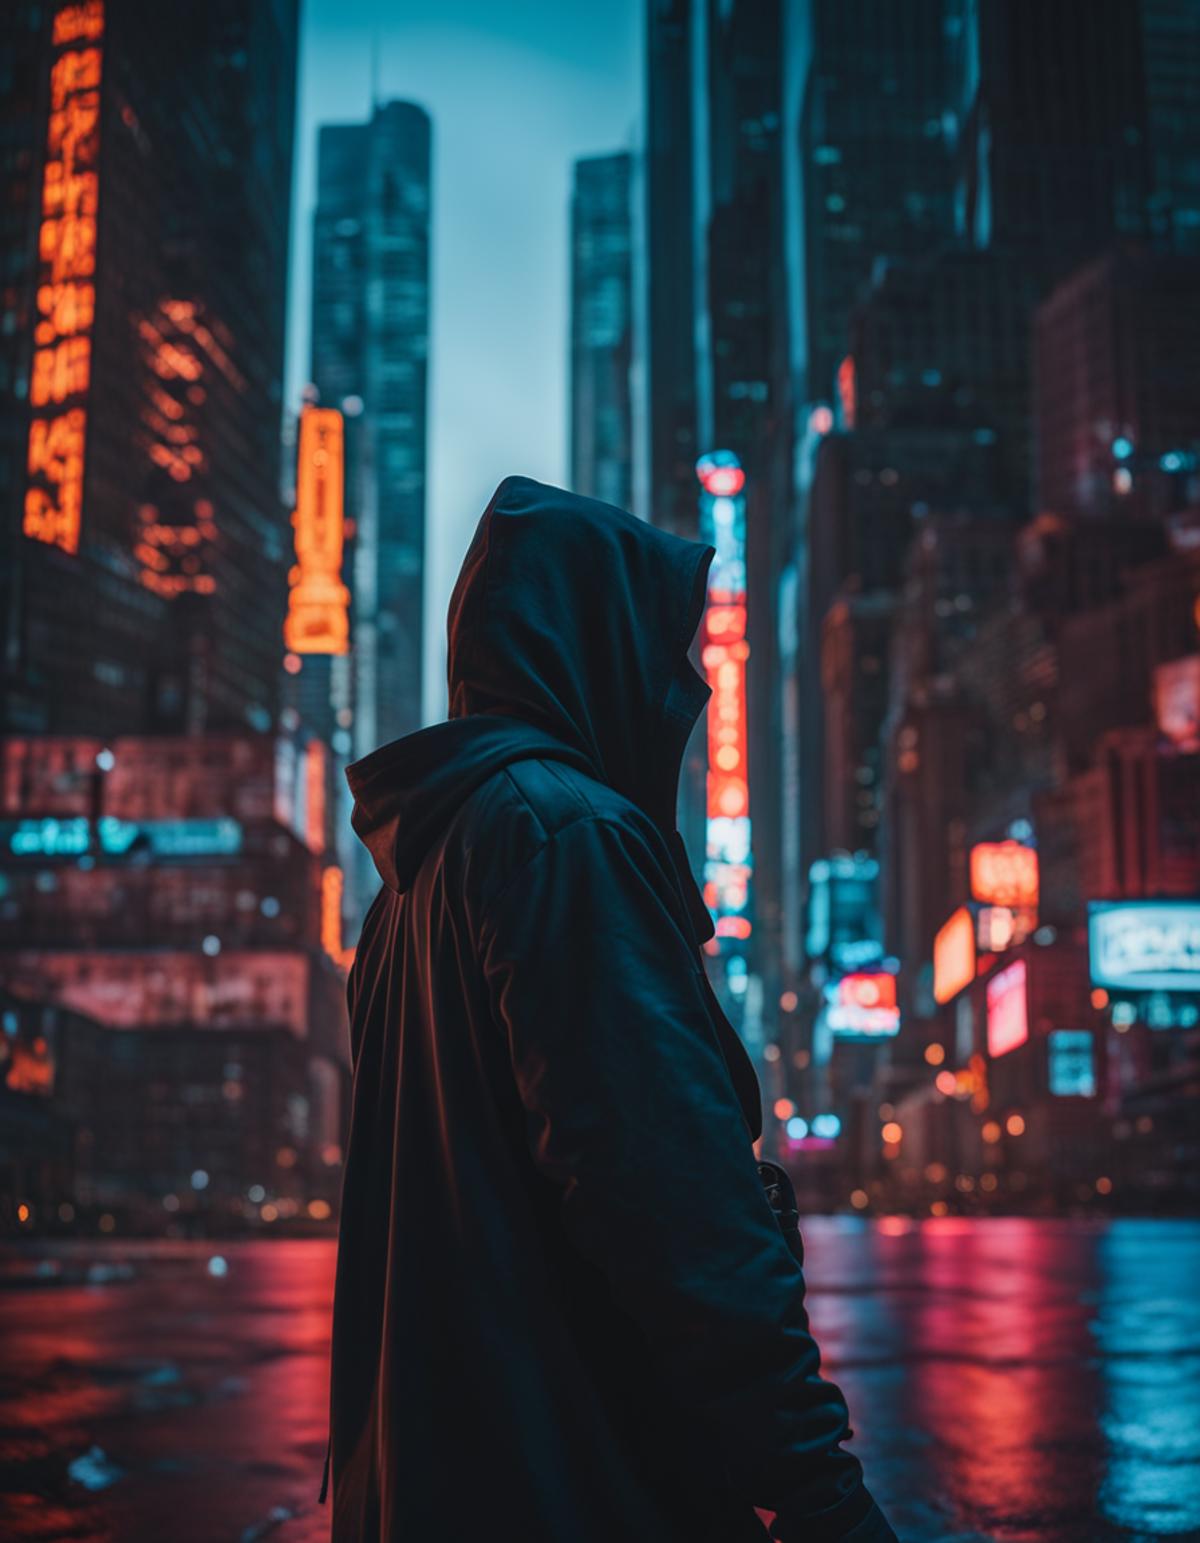 A person wearing a hooded jacket standing in a city at night.